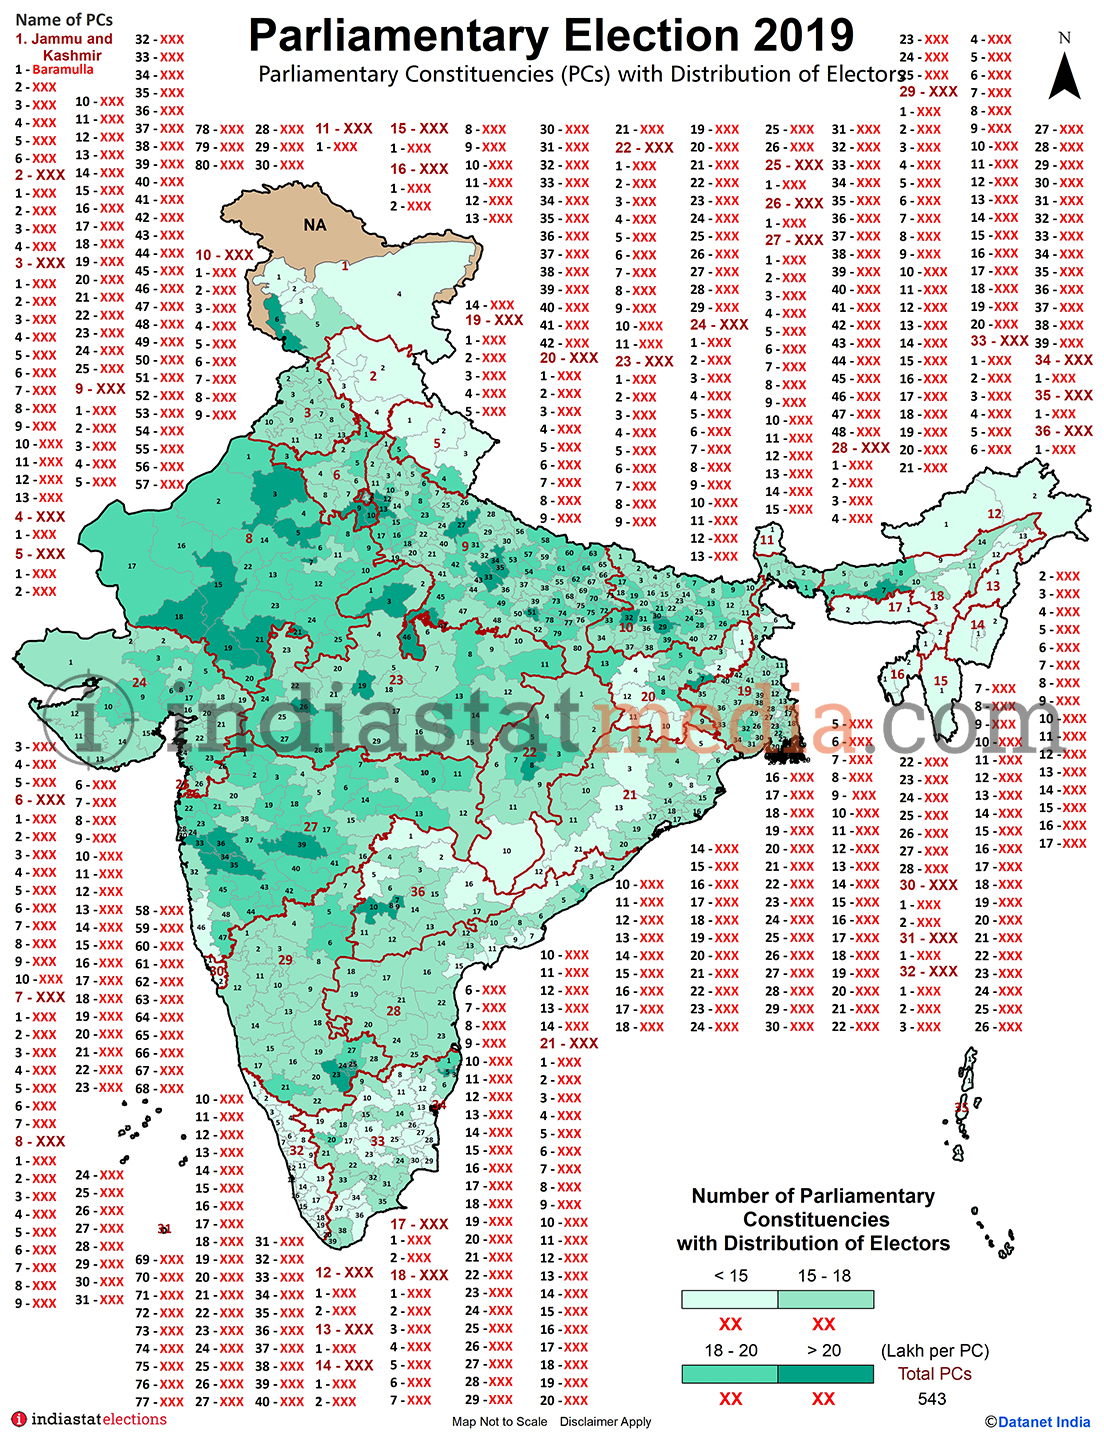 Parliamentary Constituencies with Distribution of Electors in India (Parliamentary Election - 2019)